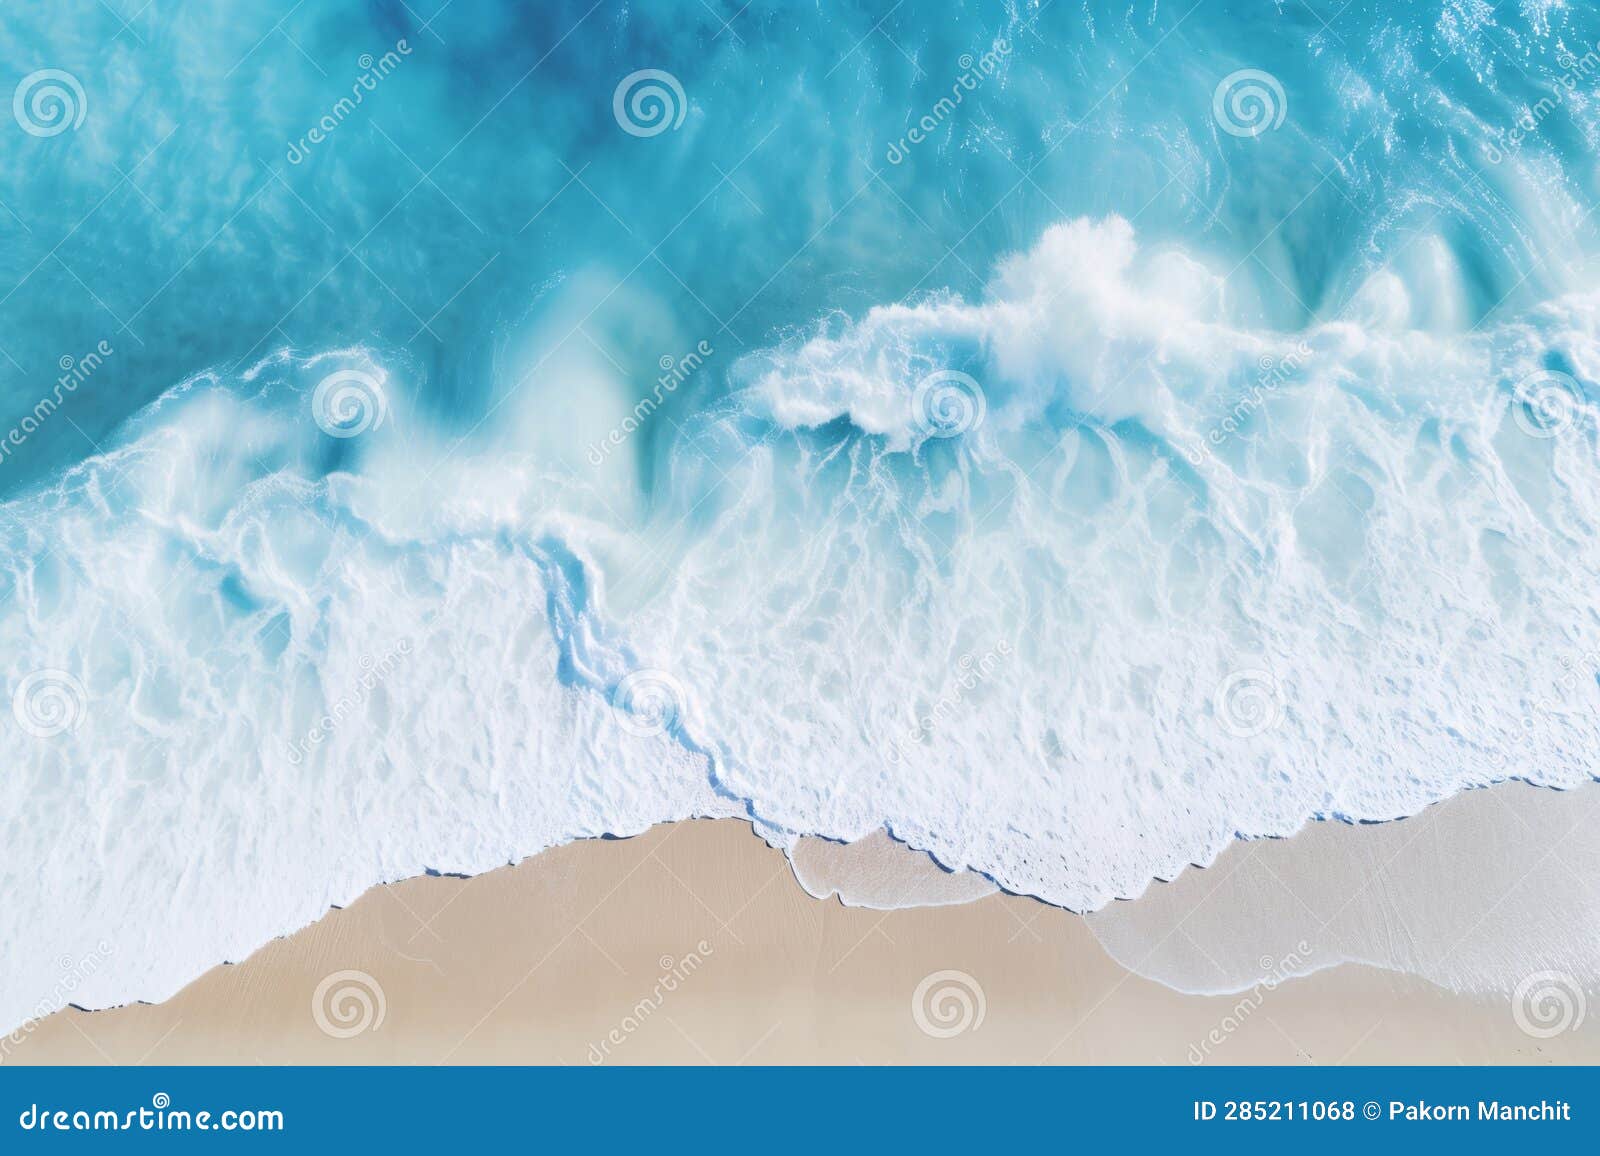 a blue water wave in the beach, in the style of teal and beige, spectacular backdrops